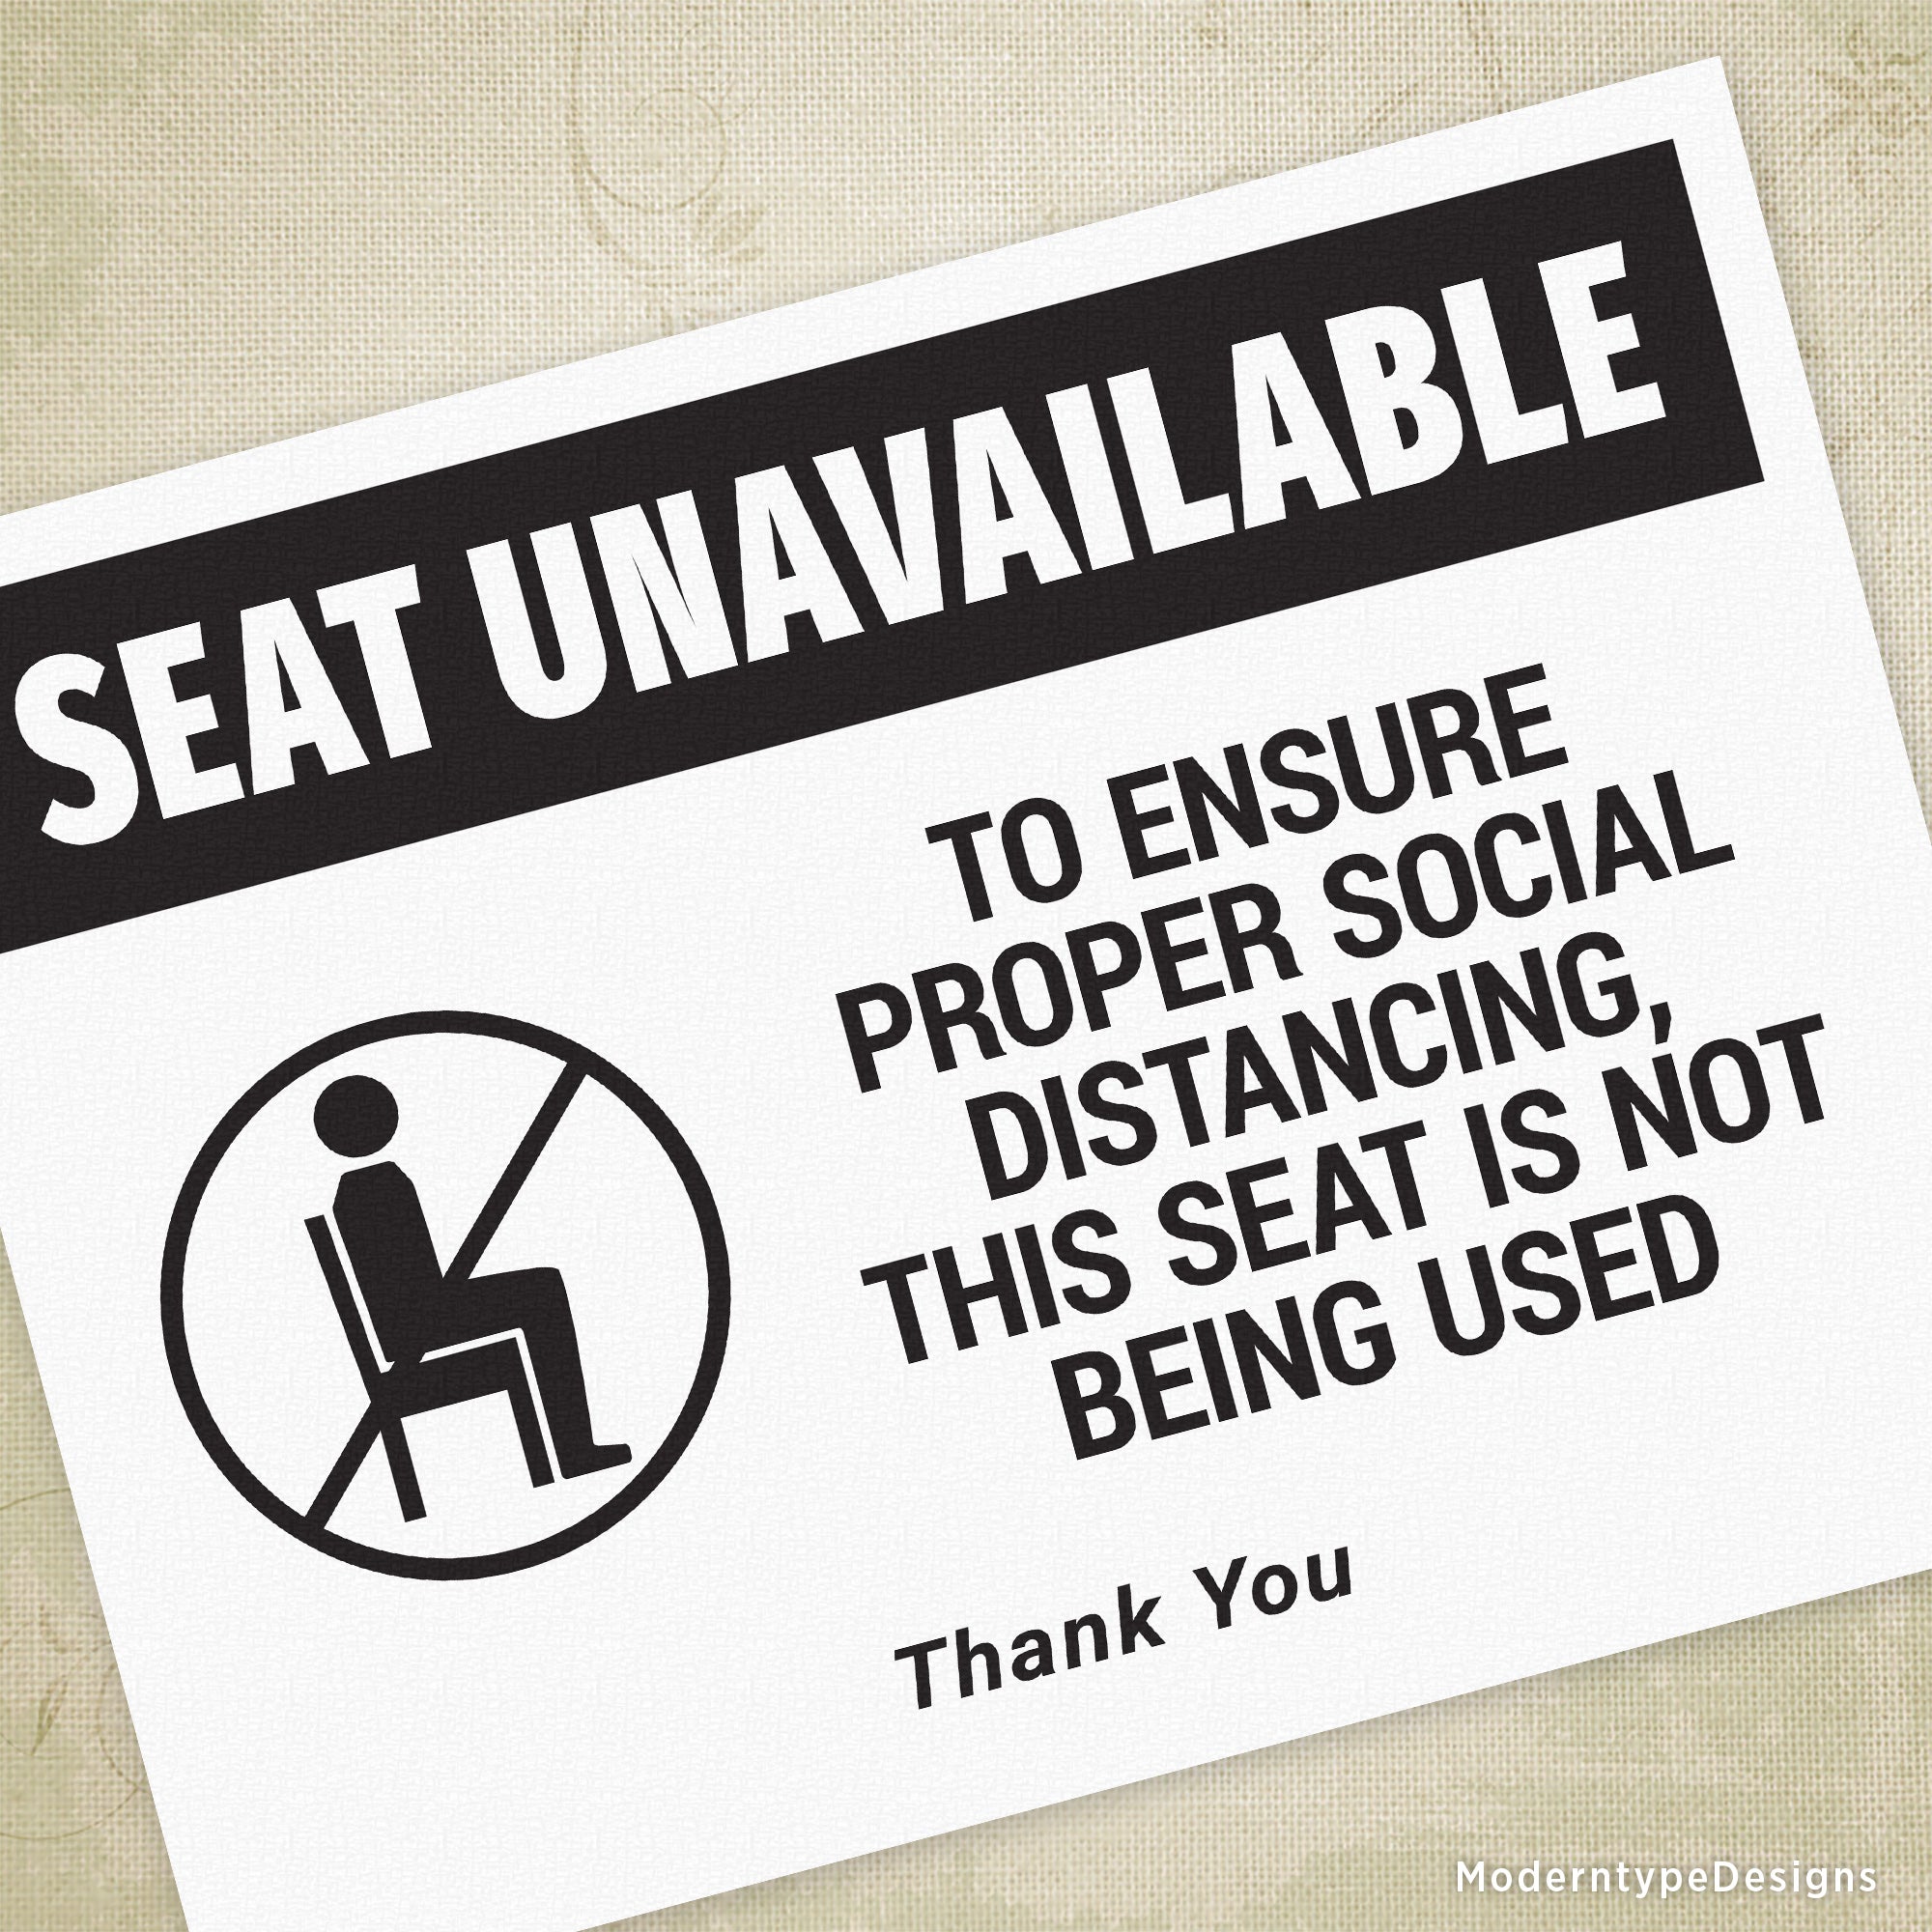 Seat Unavailable Printable Sign